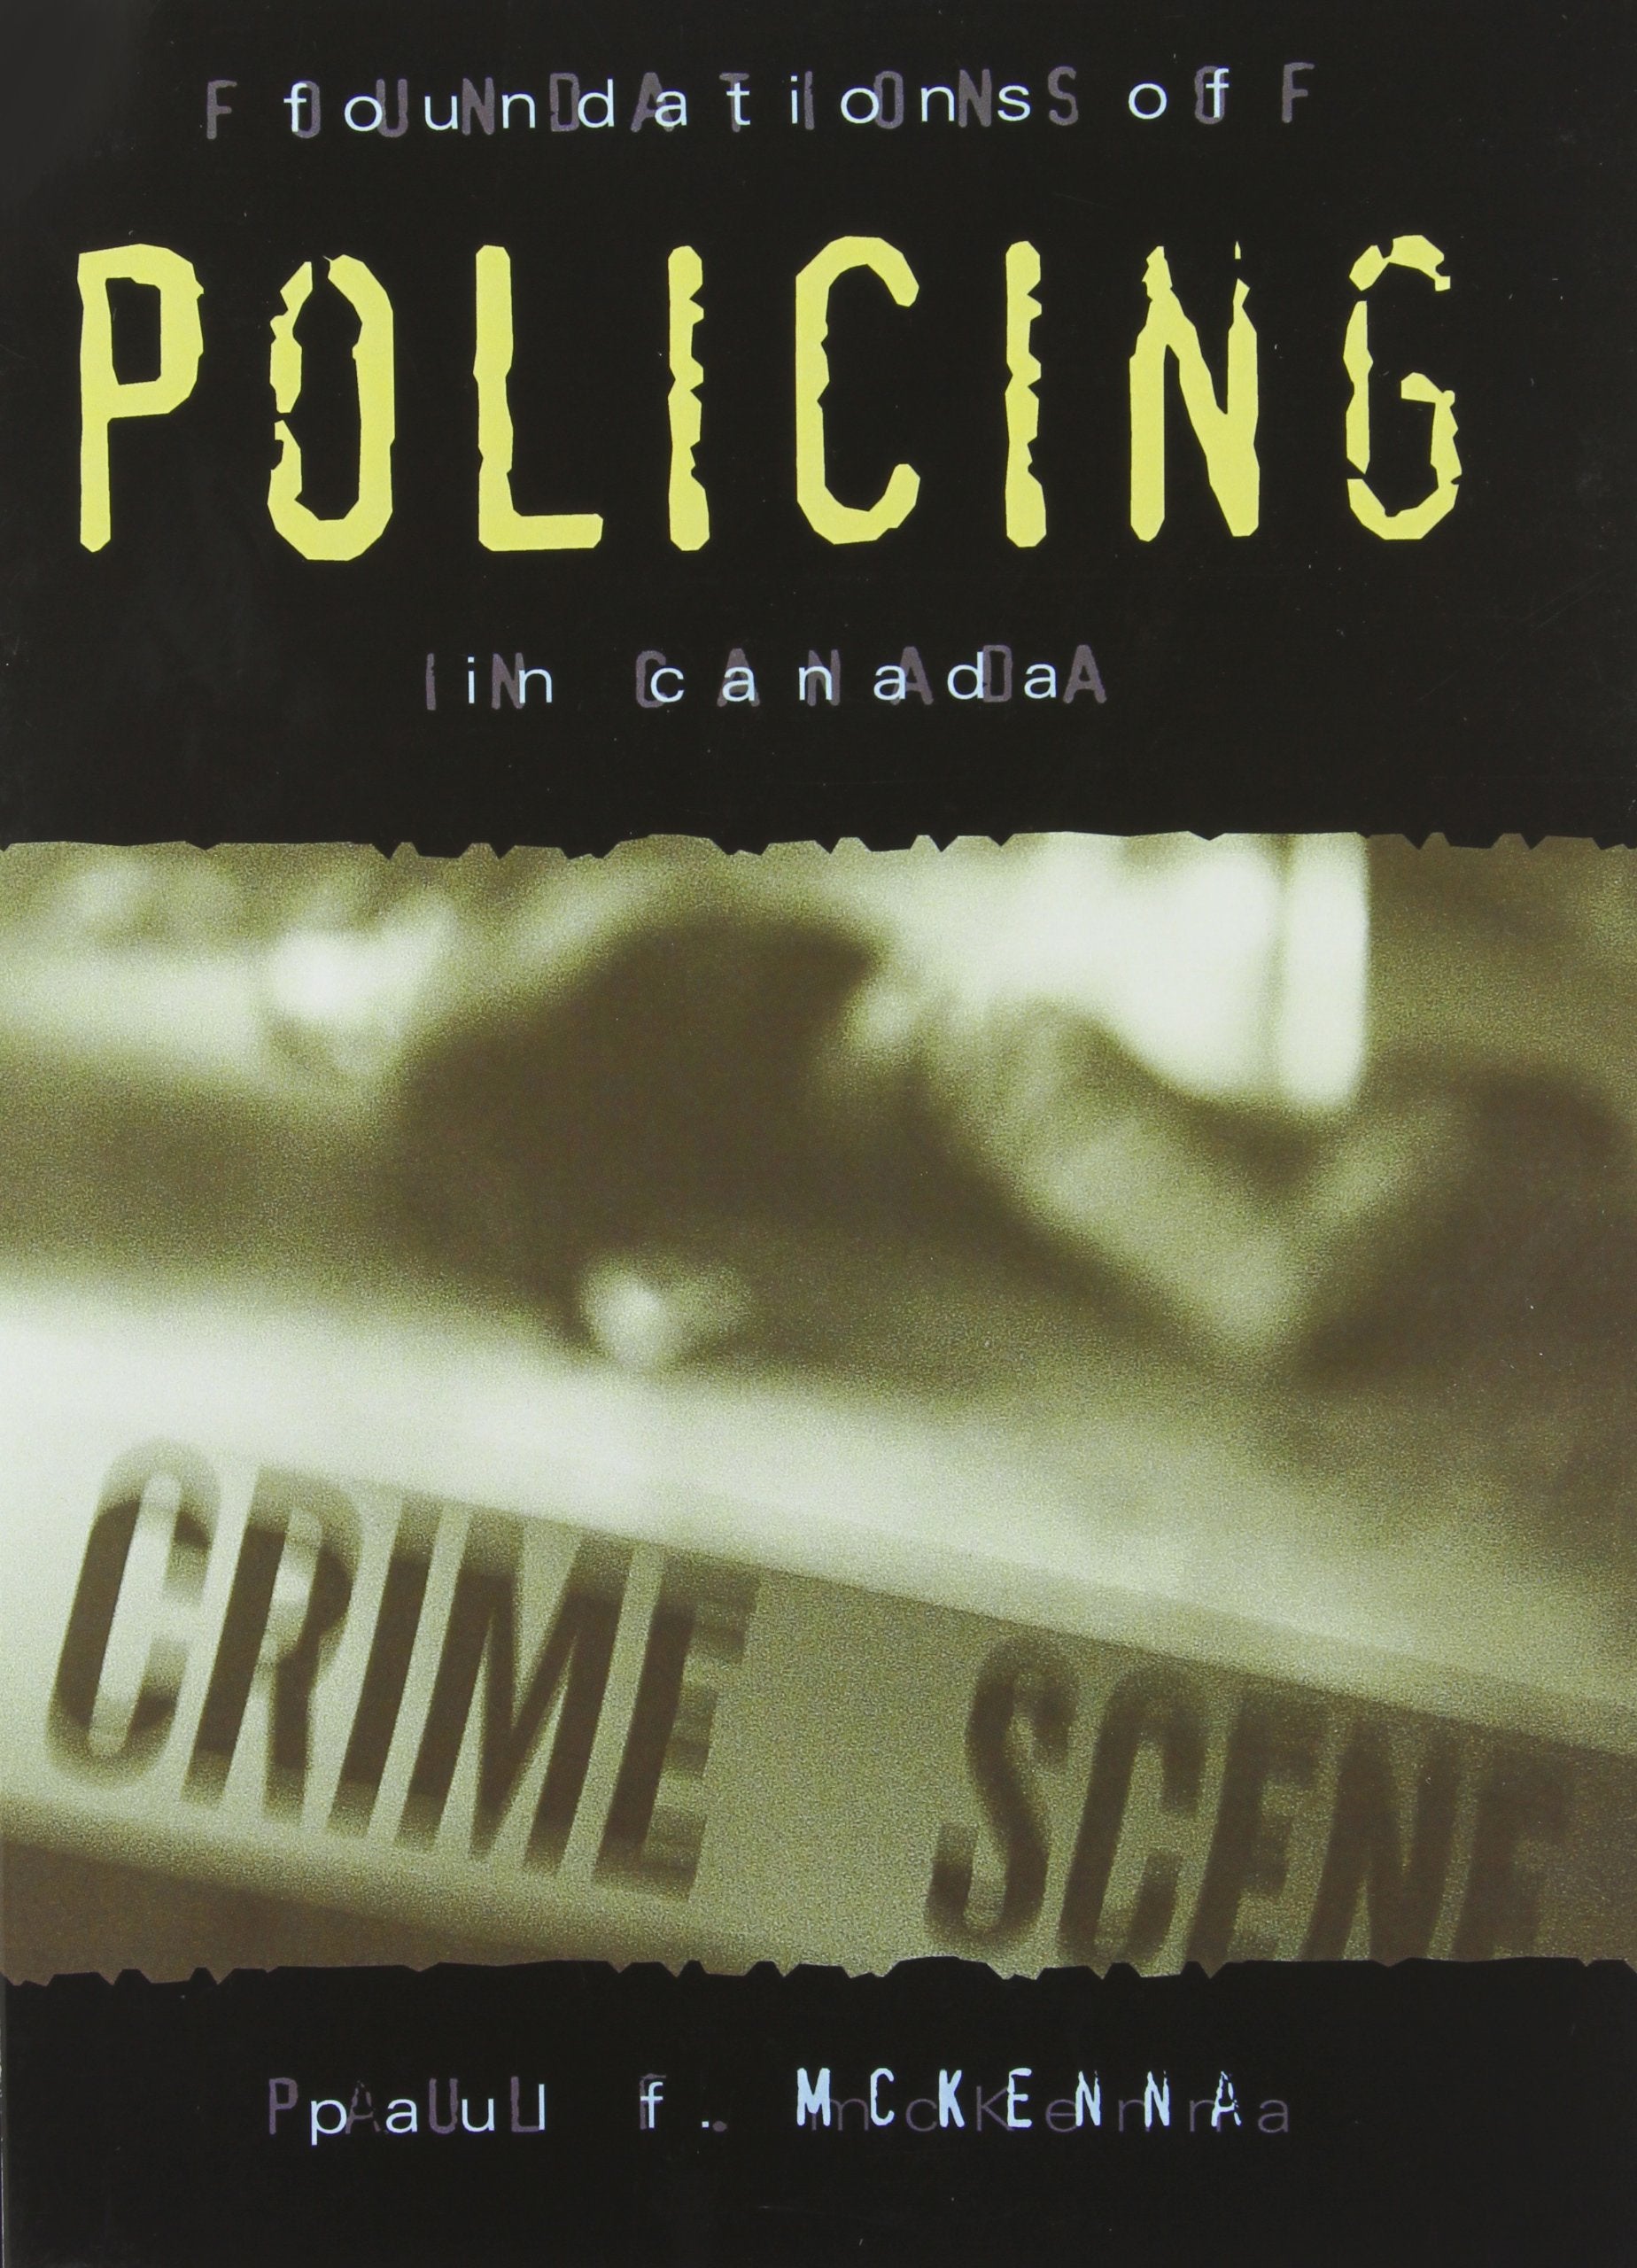 Livre ISBN 0138994366 Foundations of Policing in Canada (Paul F. McKenna)